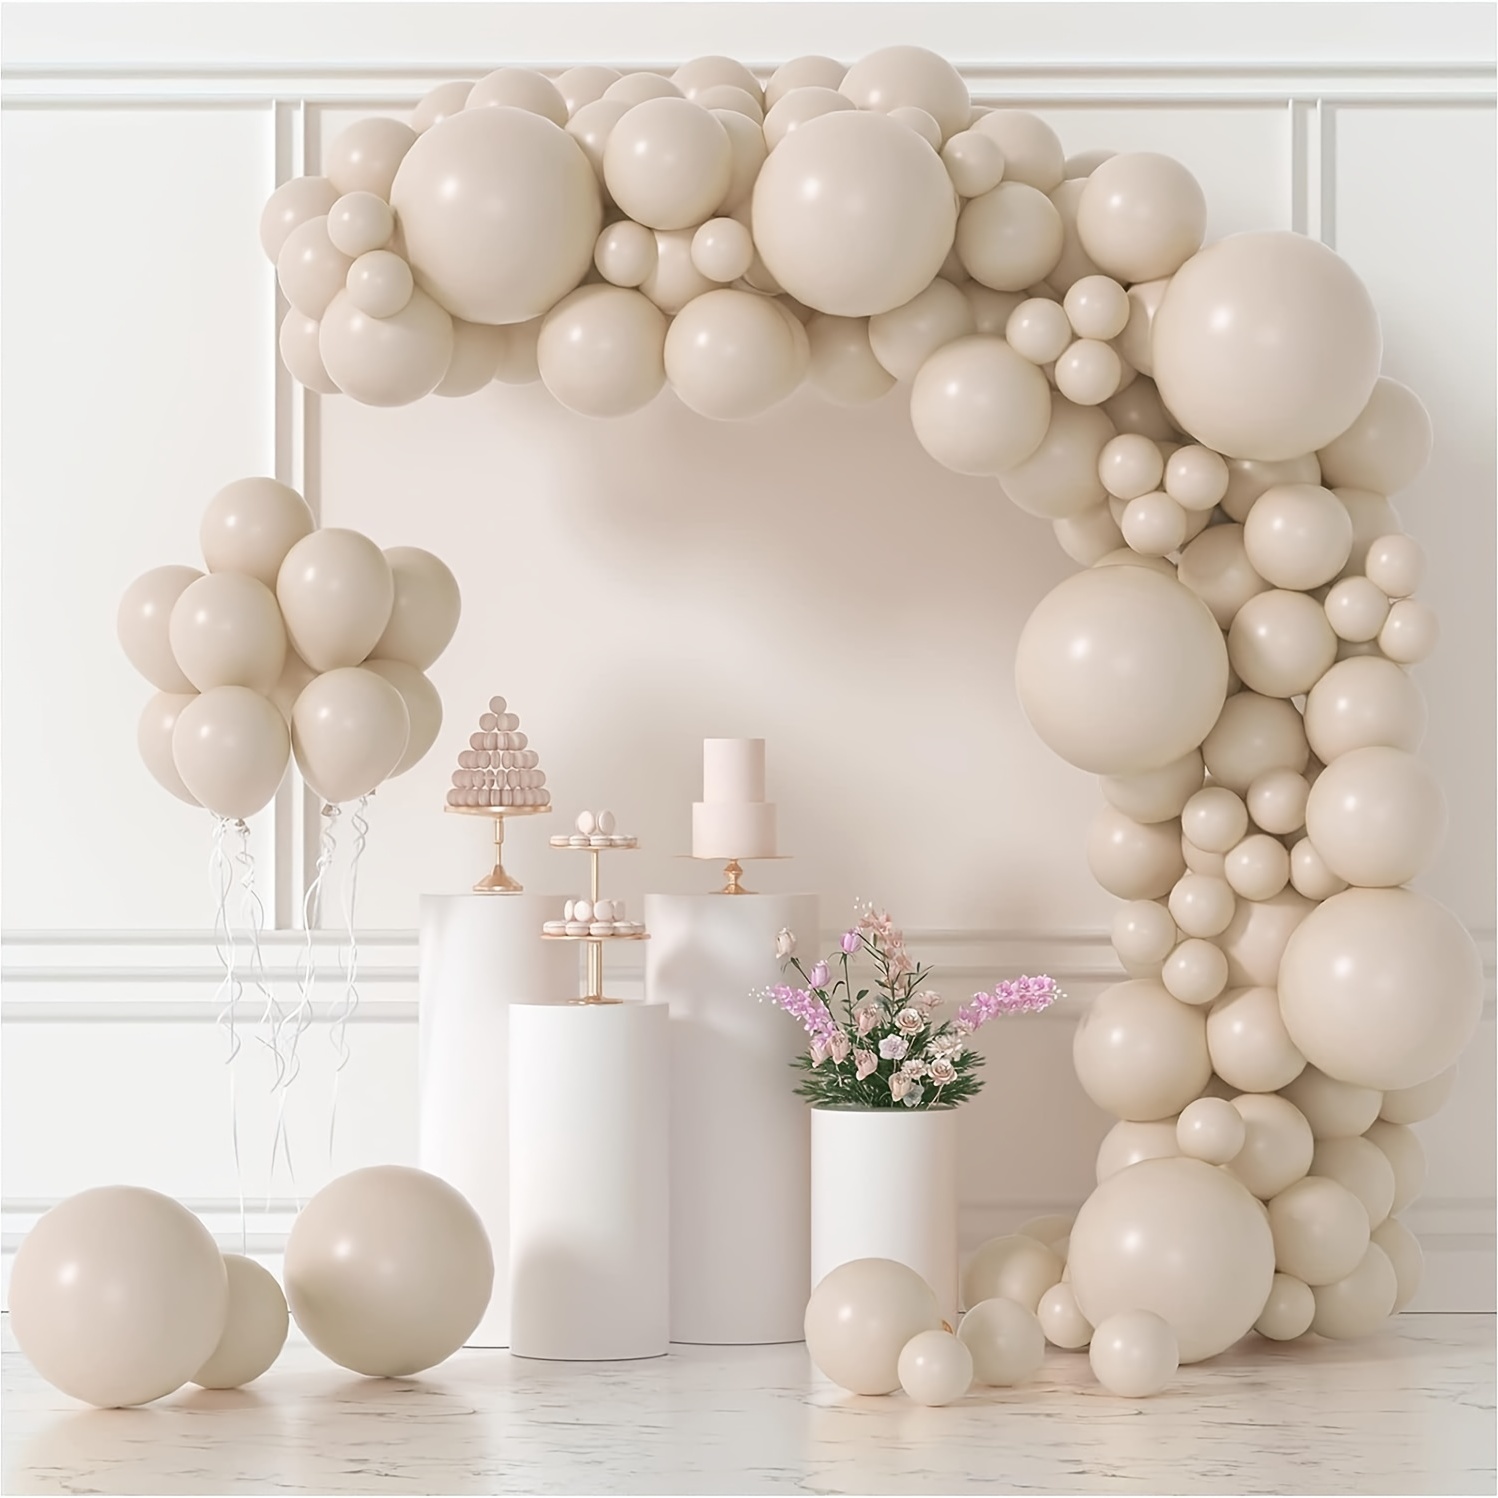 

White Sand Balloons Arch Garland Kit 108pcs 18/12/10/5 Inch Different Sizes Sand White Balloons For Wedding Bridal Decorations Birthday Party Supplies